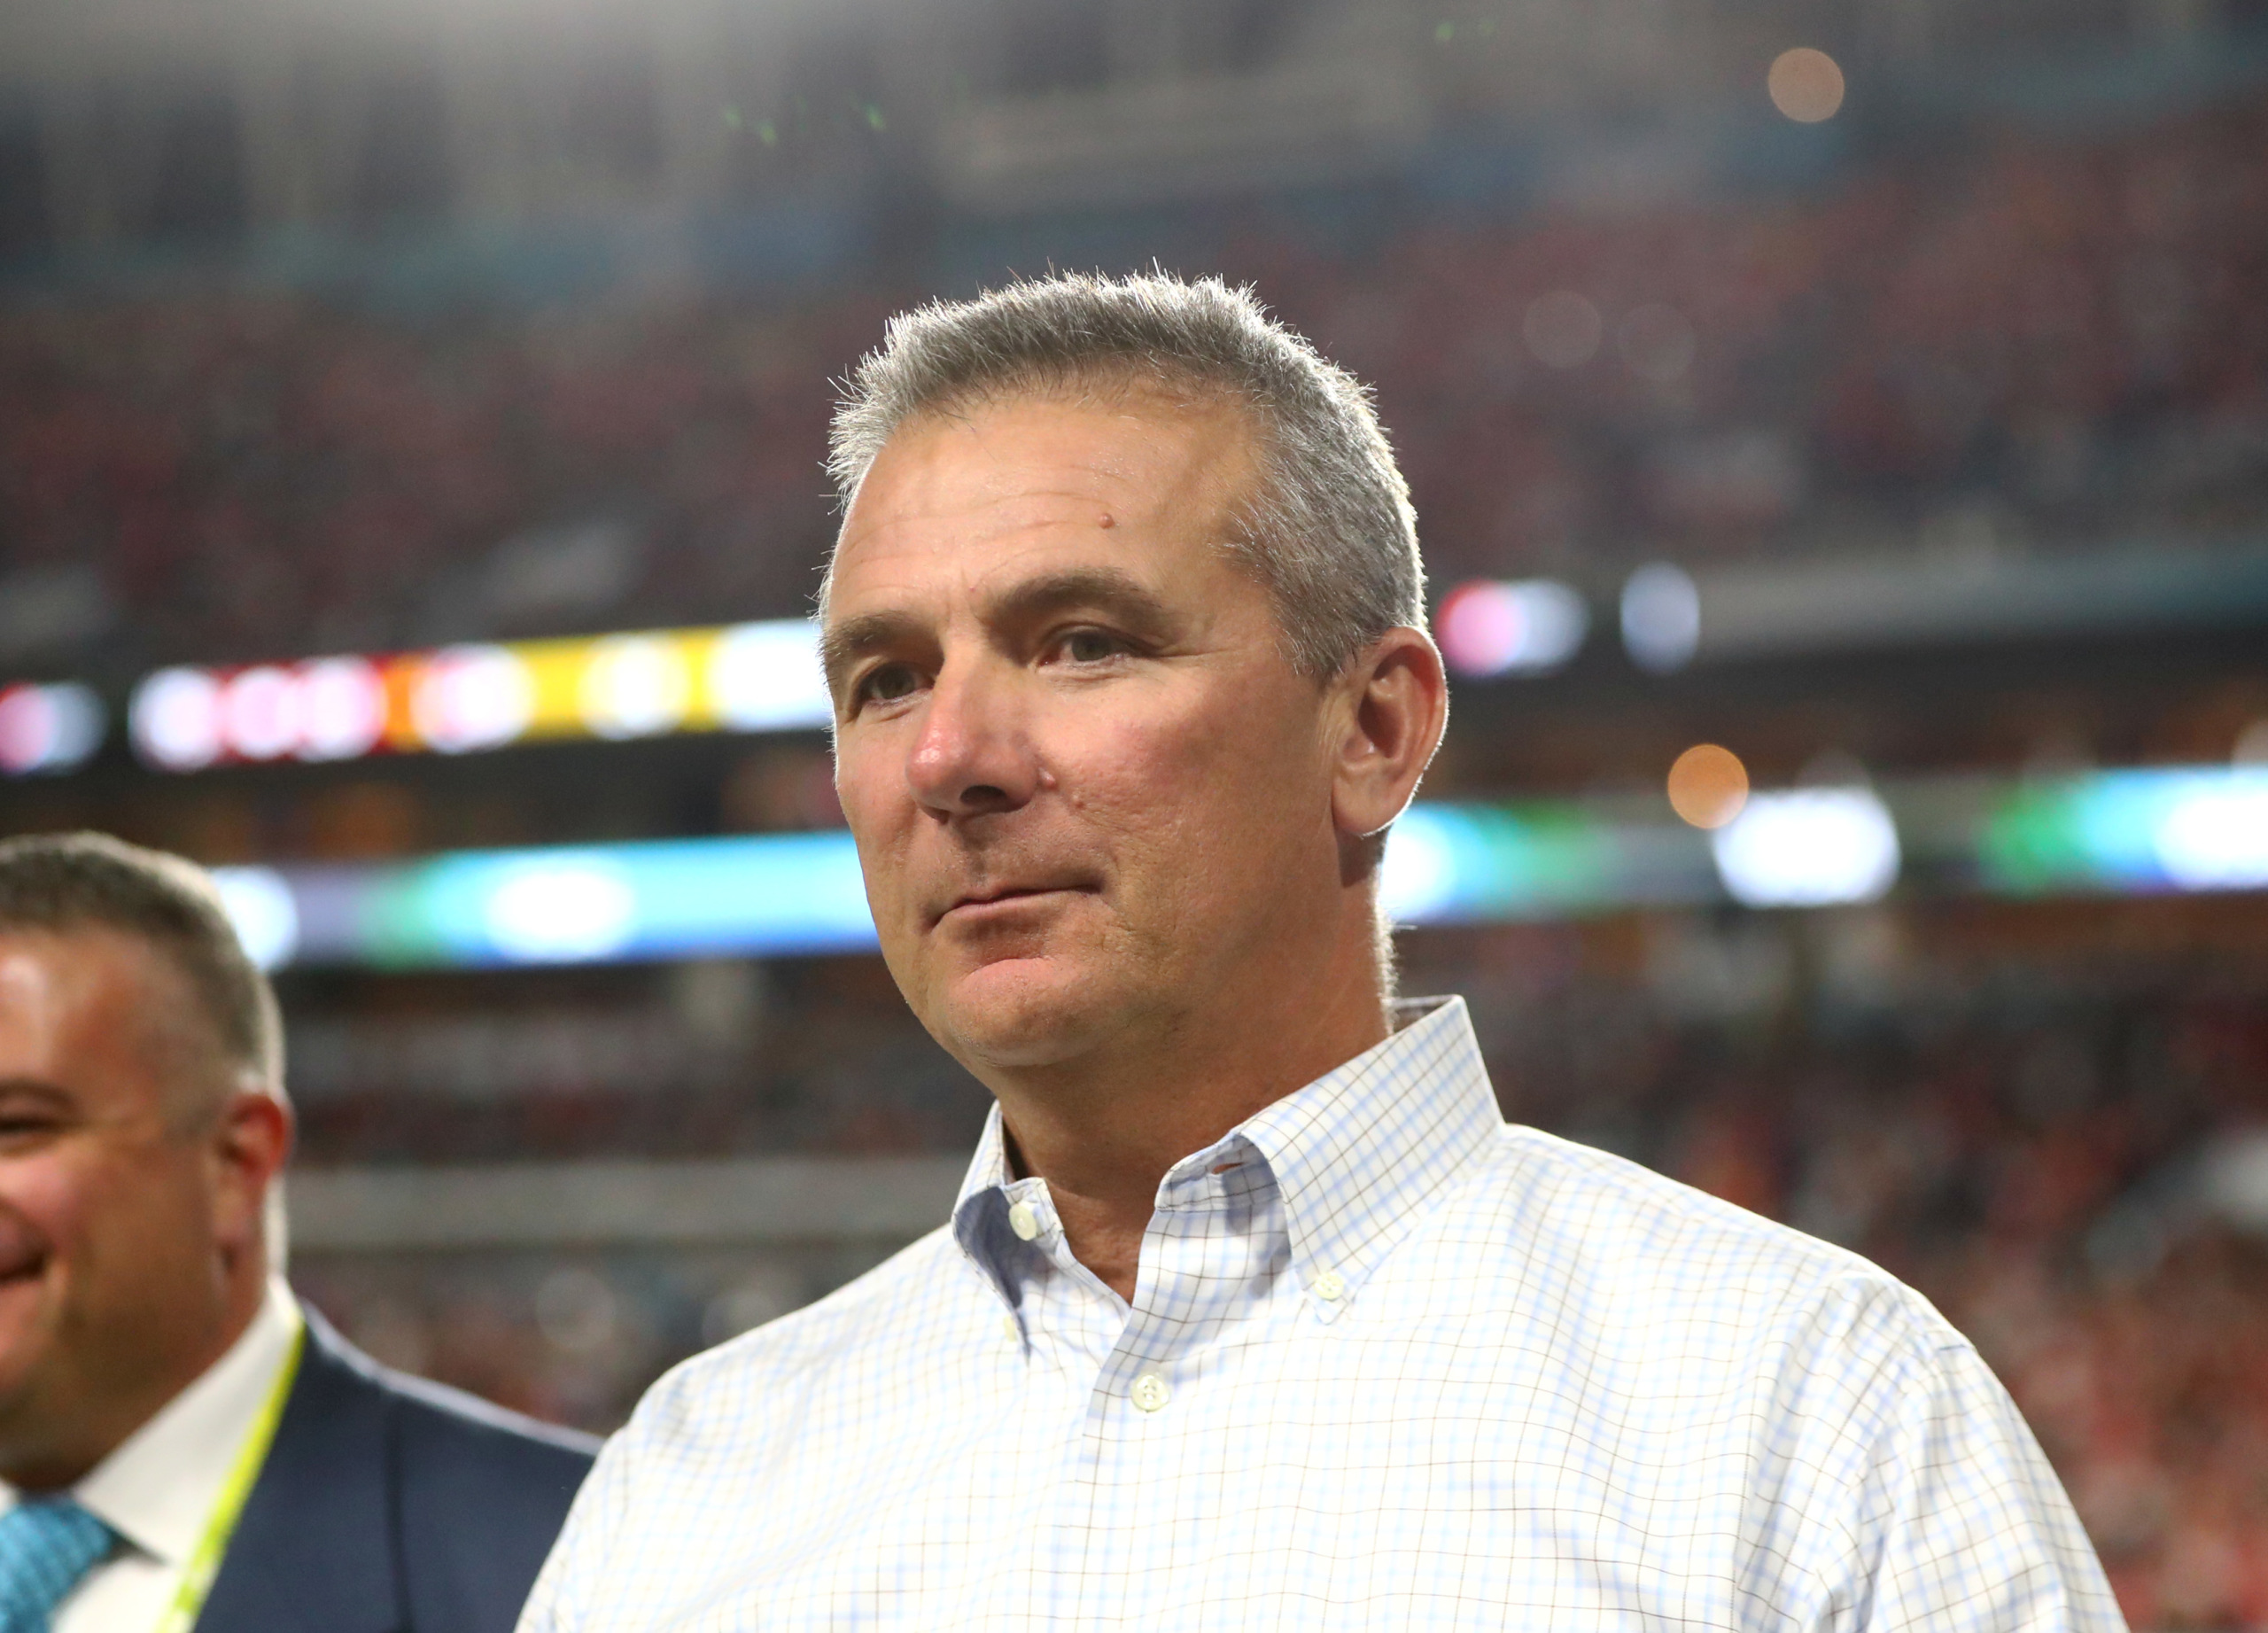 Urban Meyer, Oliver Luck, Jessica Mendoza Join New NIL Consulting Firm